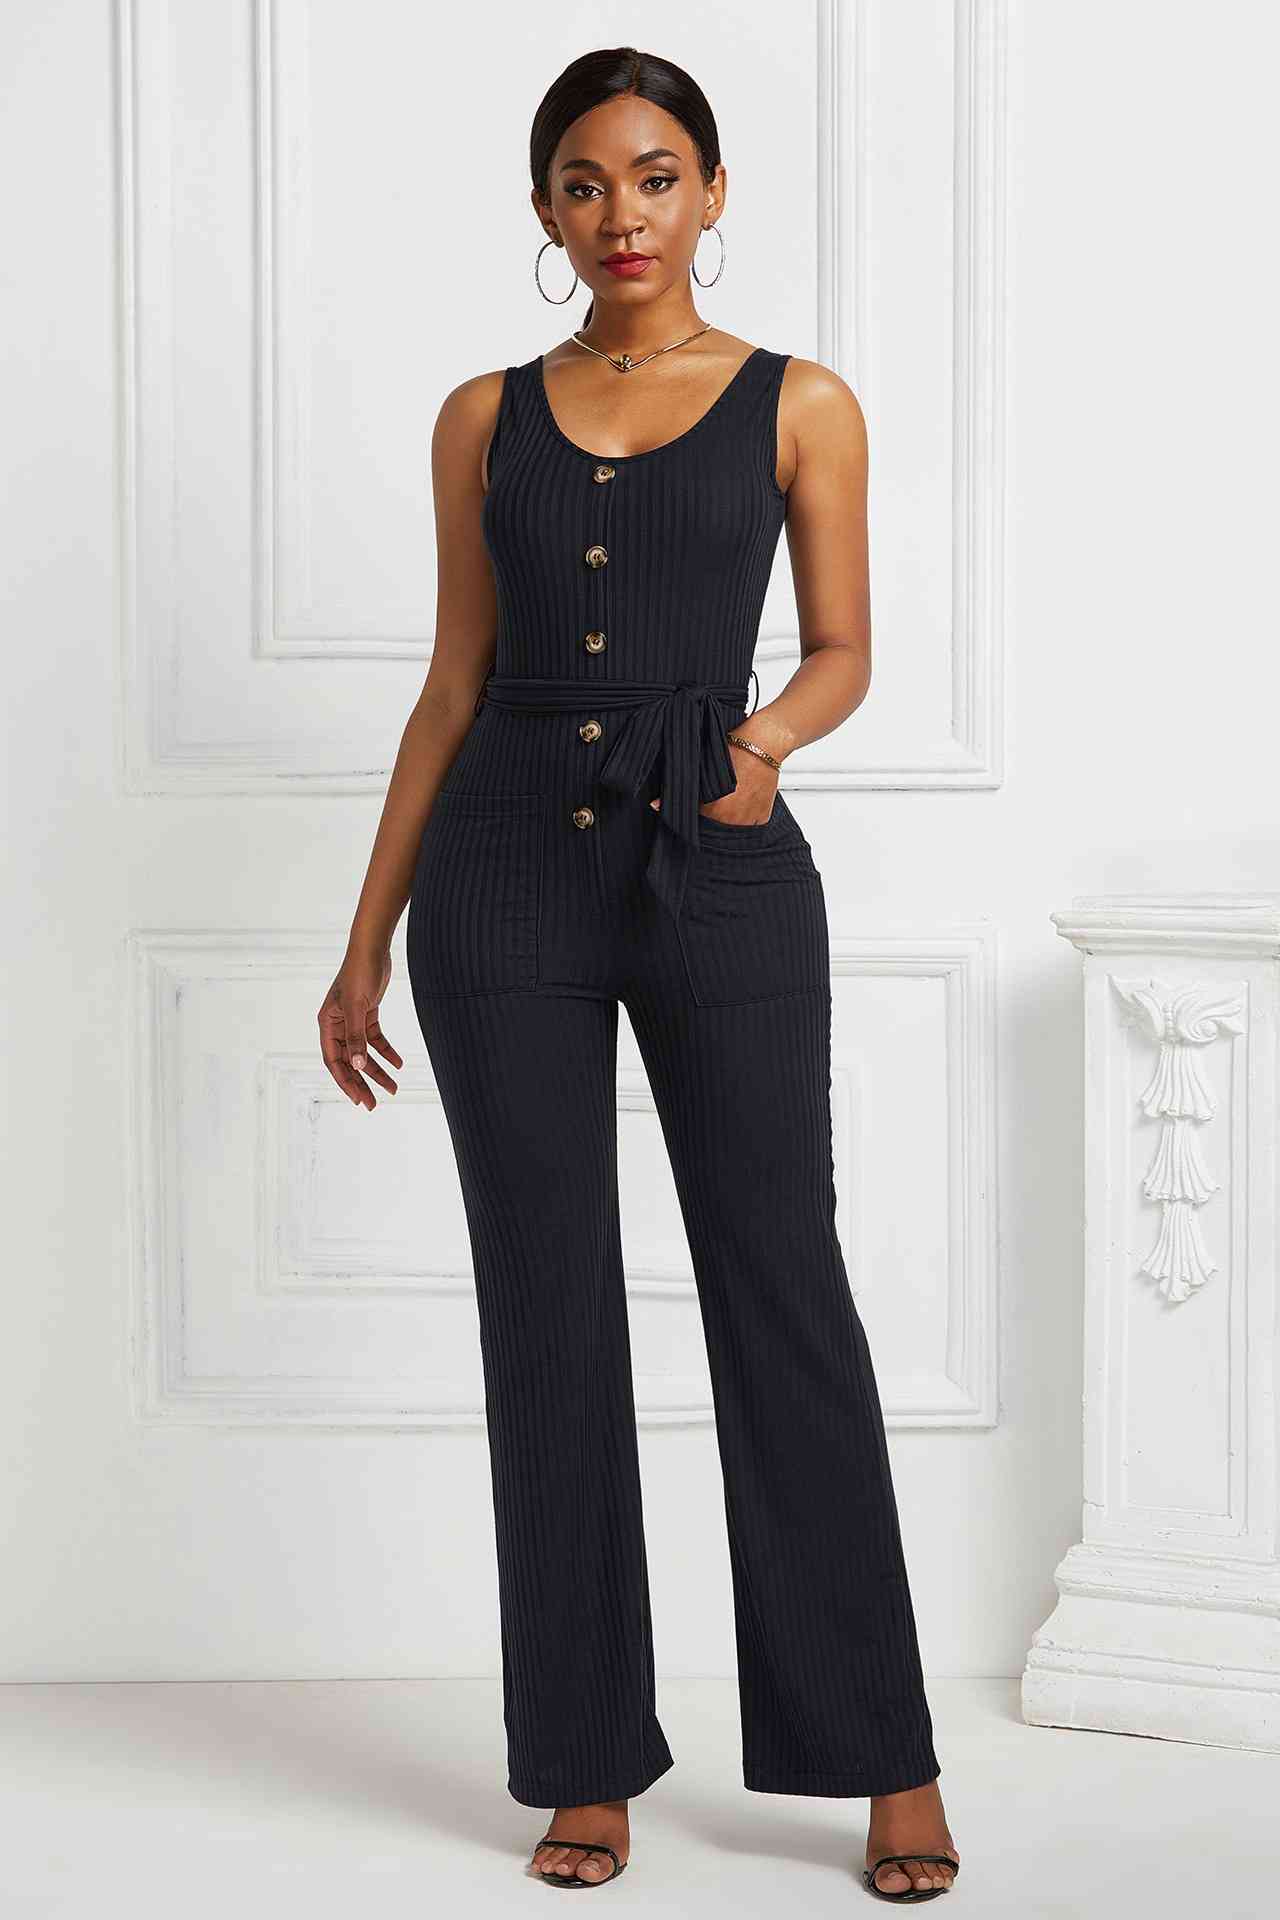 Button Detail Tie Waist Jumpsuit with Pockets - Black / S Apparel & Accessories Girl Code